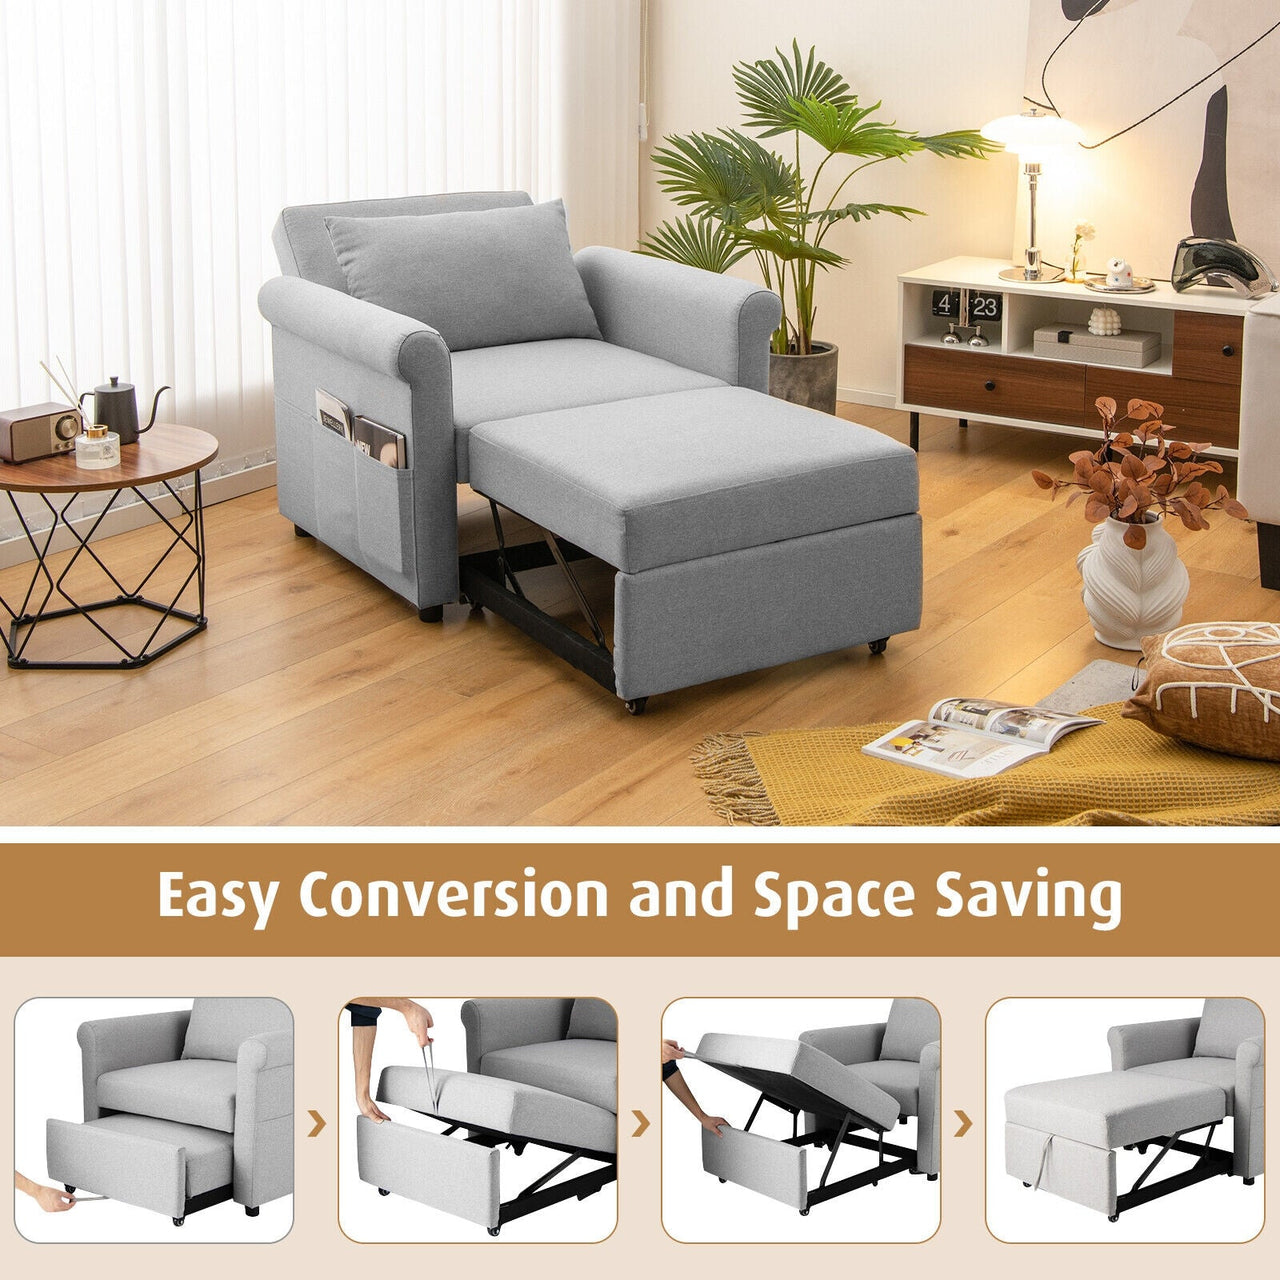 3-in-1 Pull-out Convertible Adjustable Reclining Sofa Bed